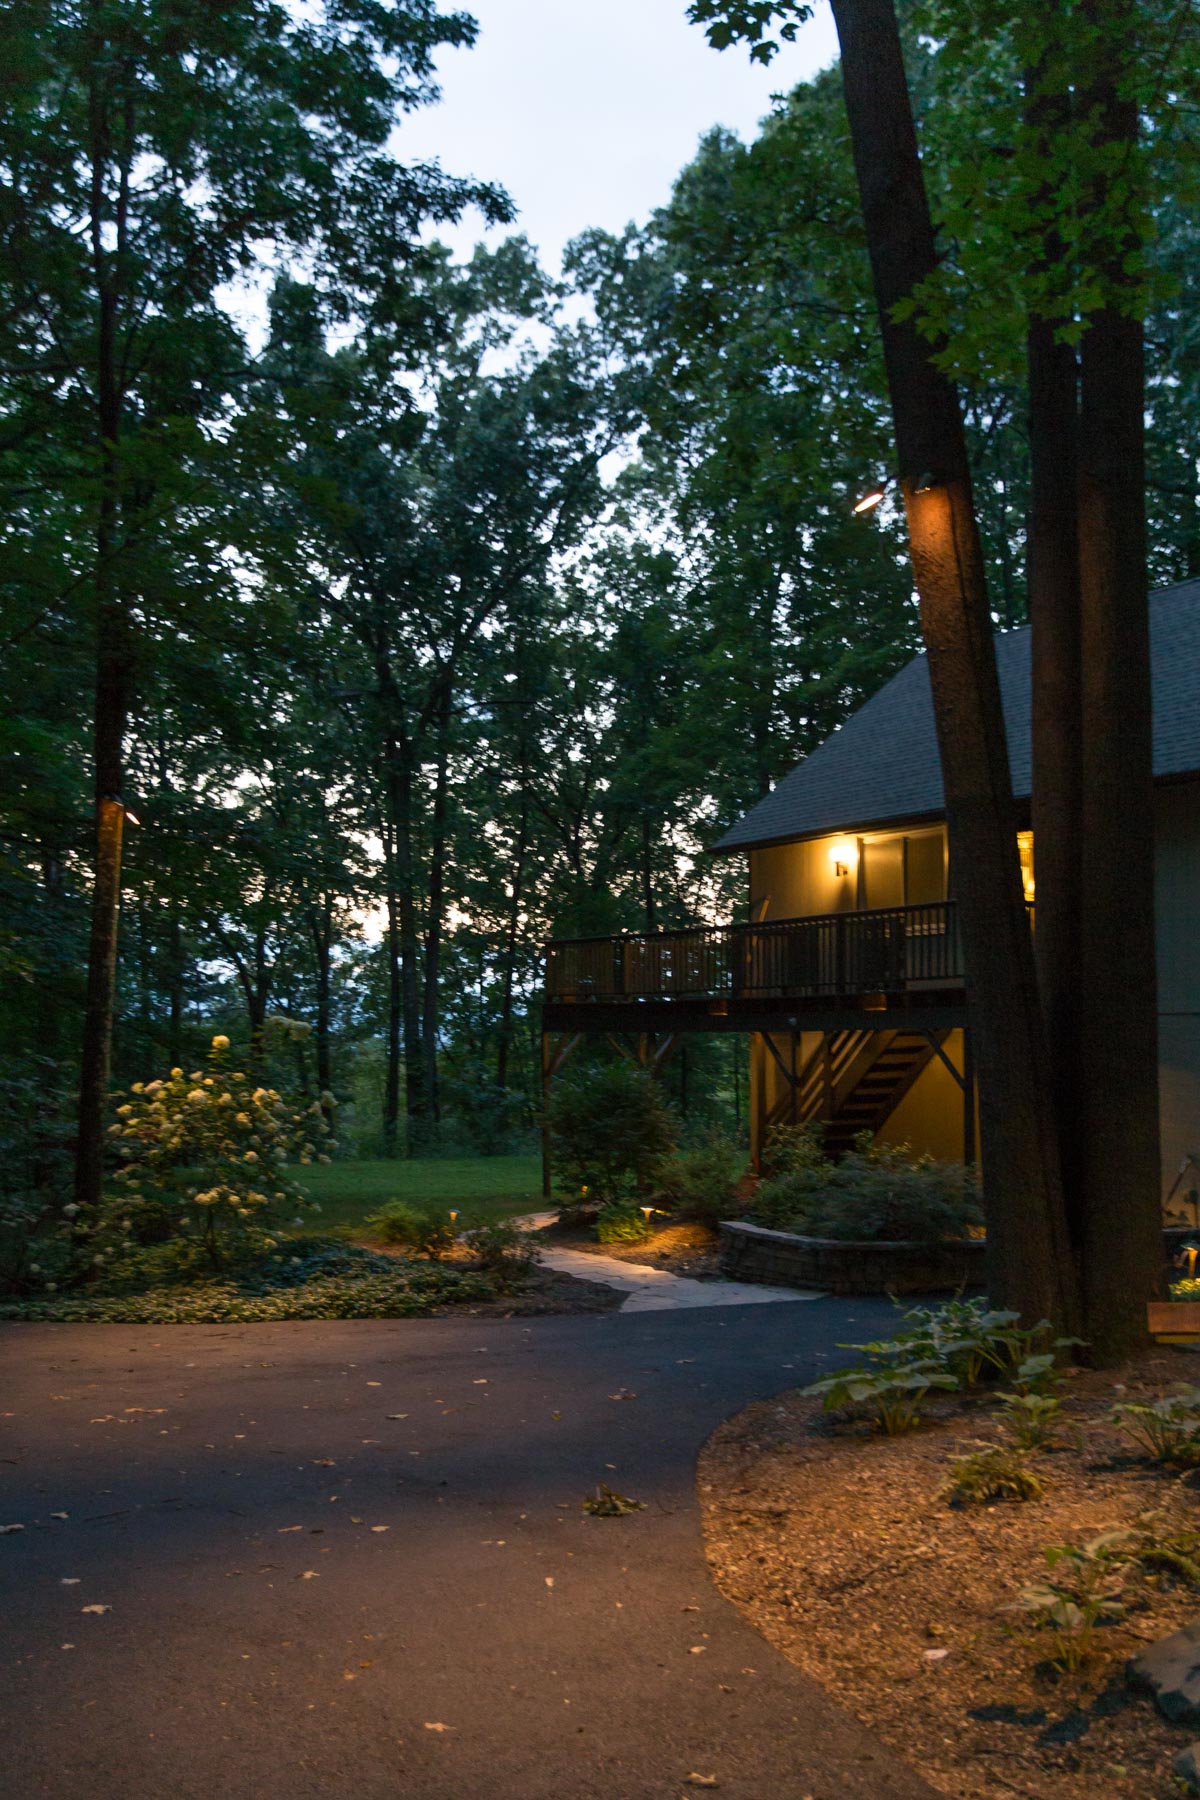 Outdoor lighting scheme around driveway with walkway, retaining walls, down lights and path lighting in New Paltz, NY.